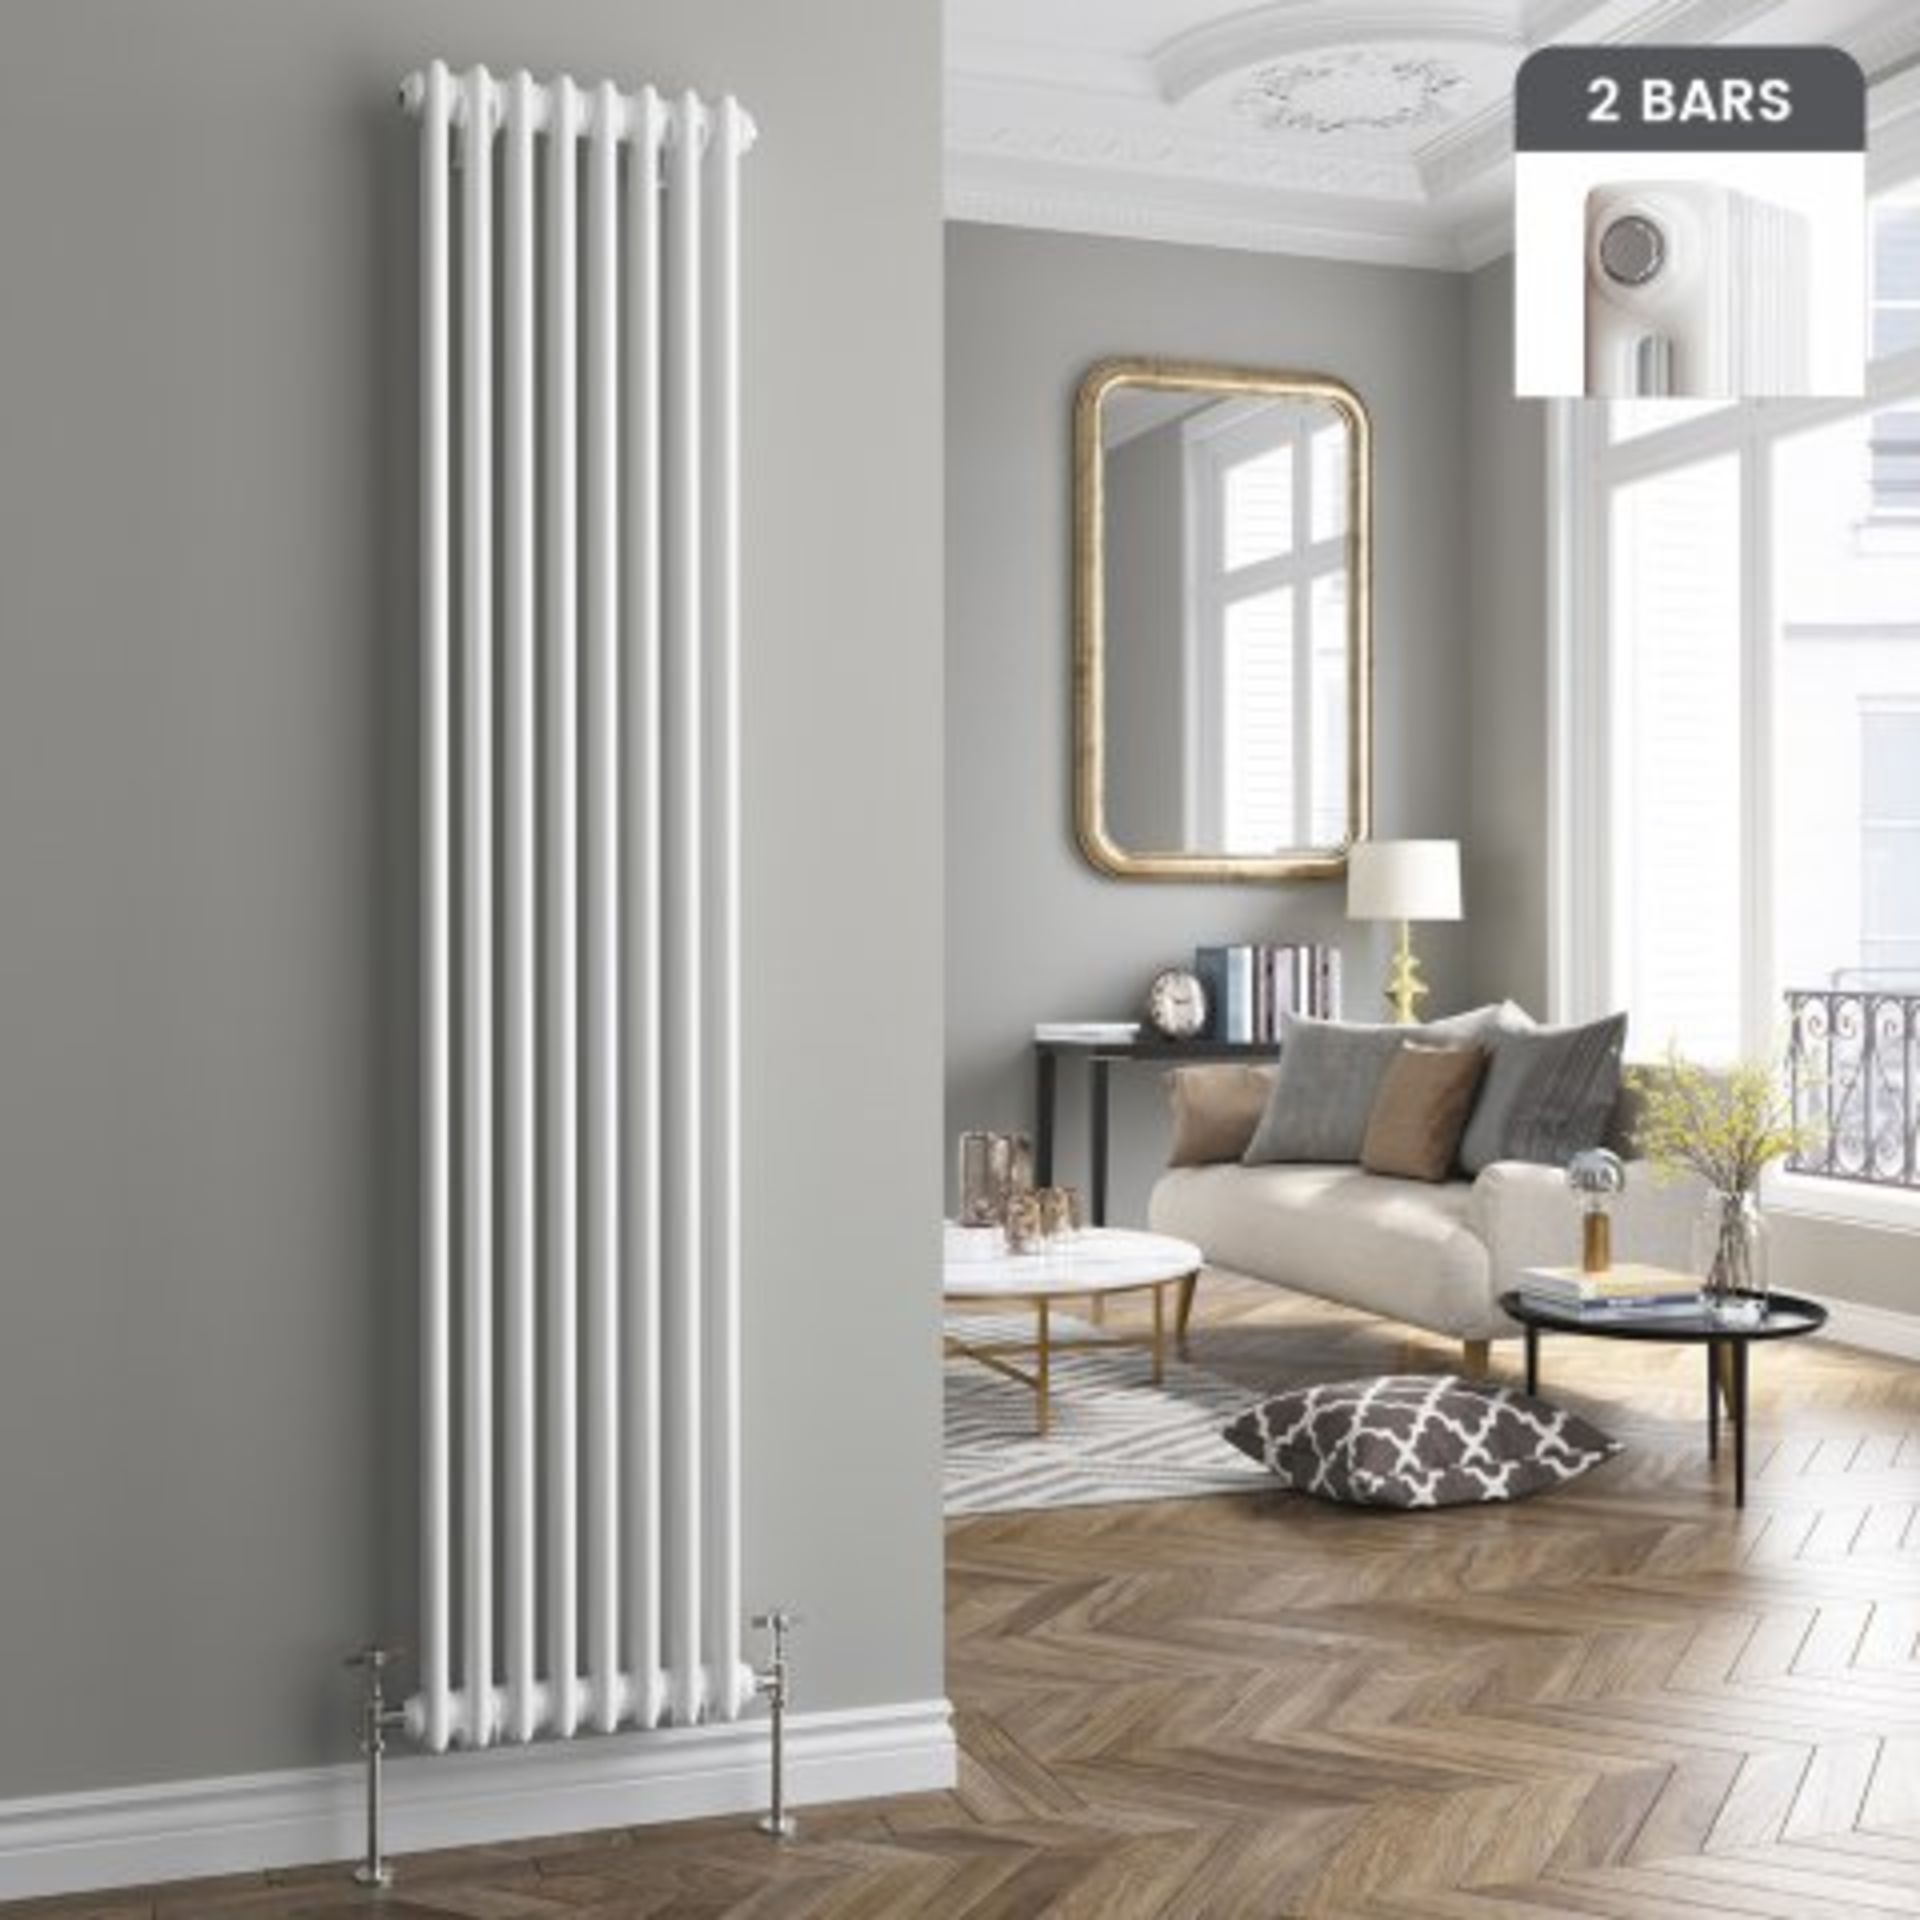 (I170) 1800x380mm White Double Panel Vertical Colosseum Traditional Radiator. RRP £355.99. For an